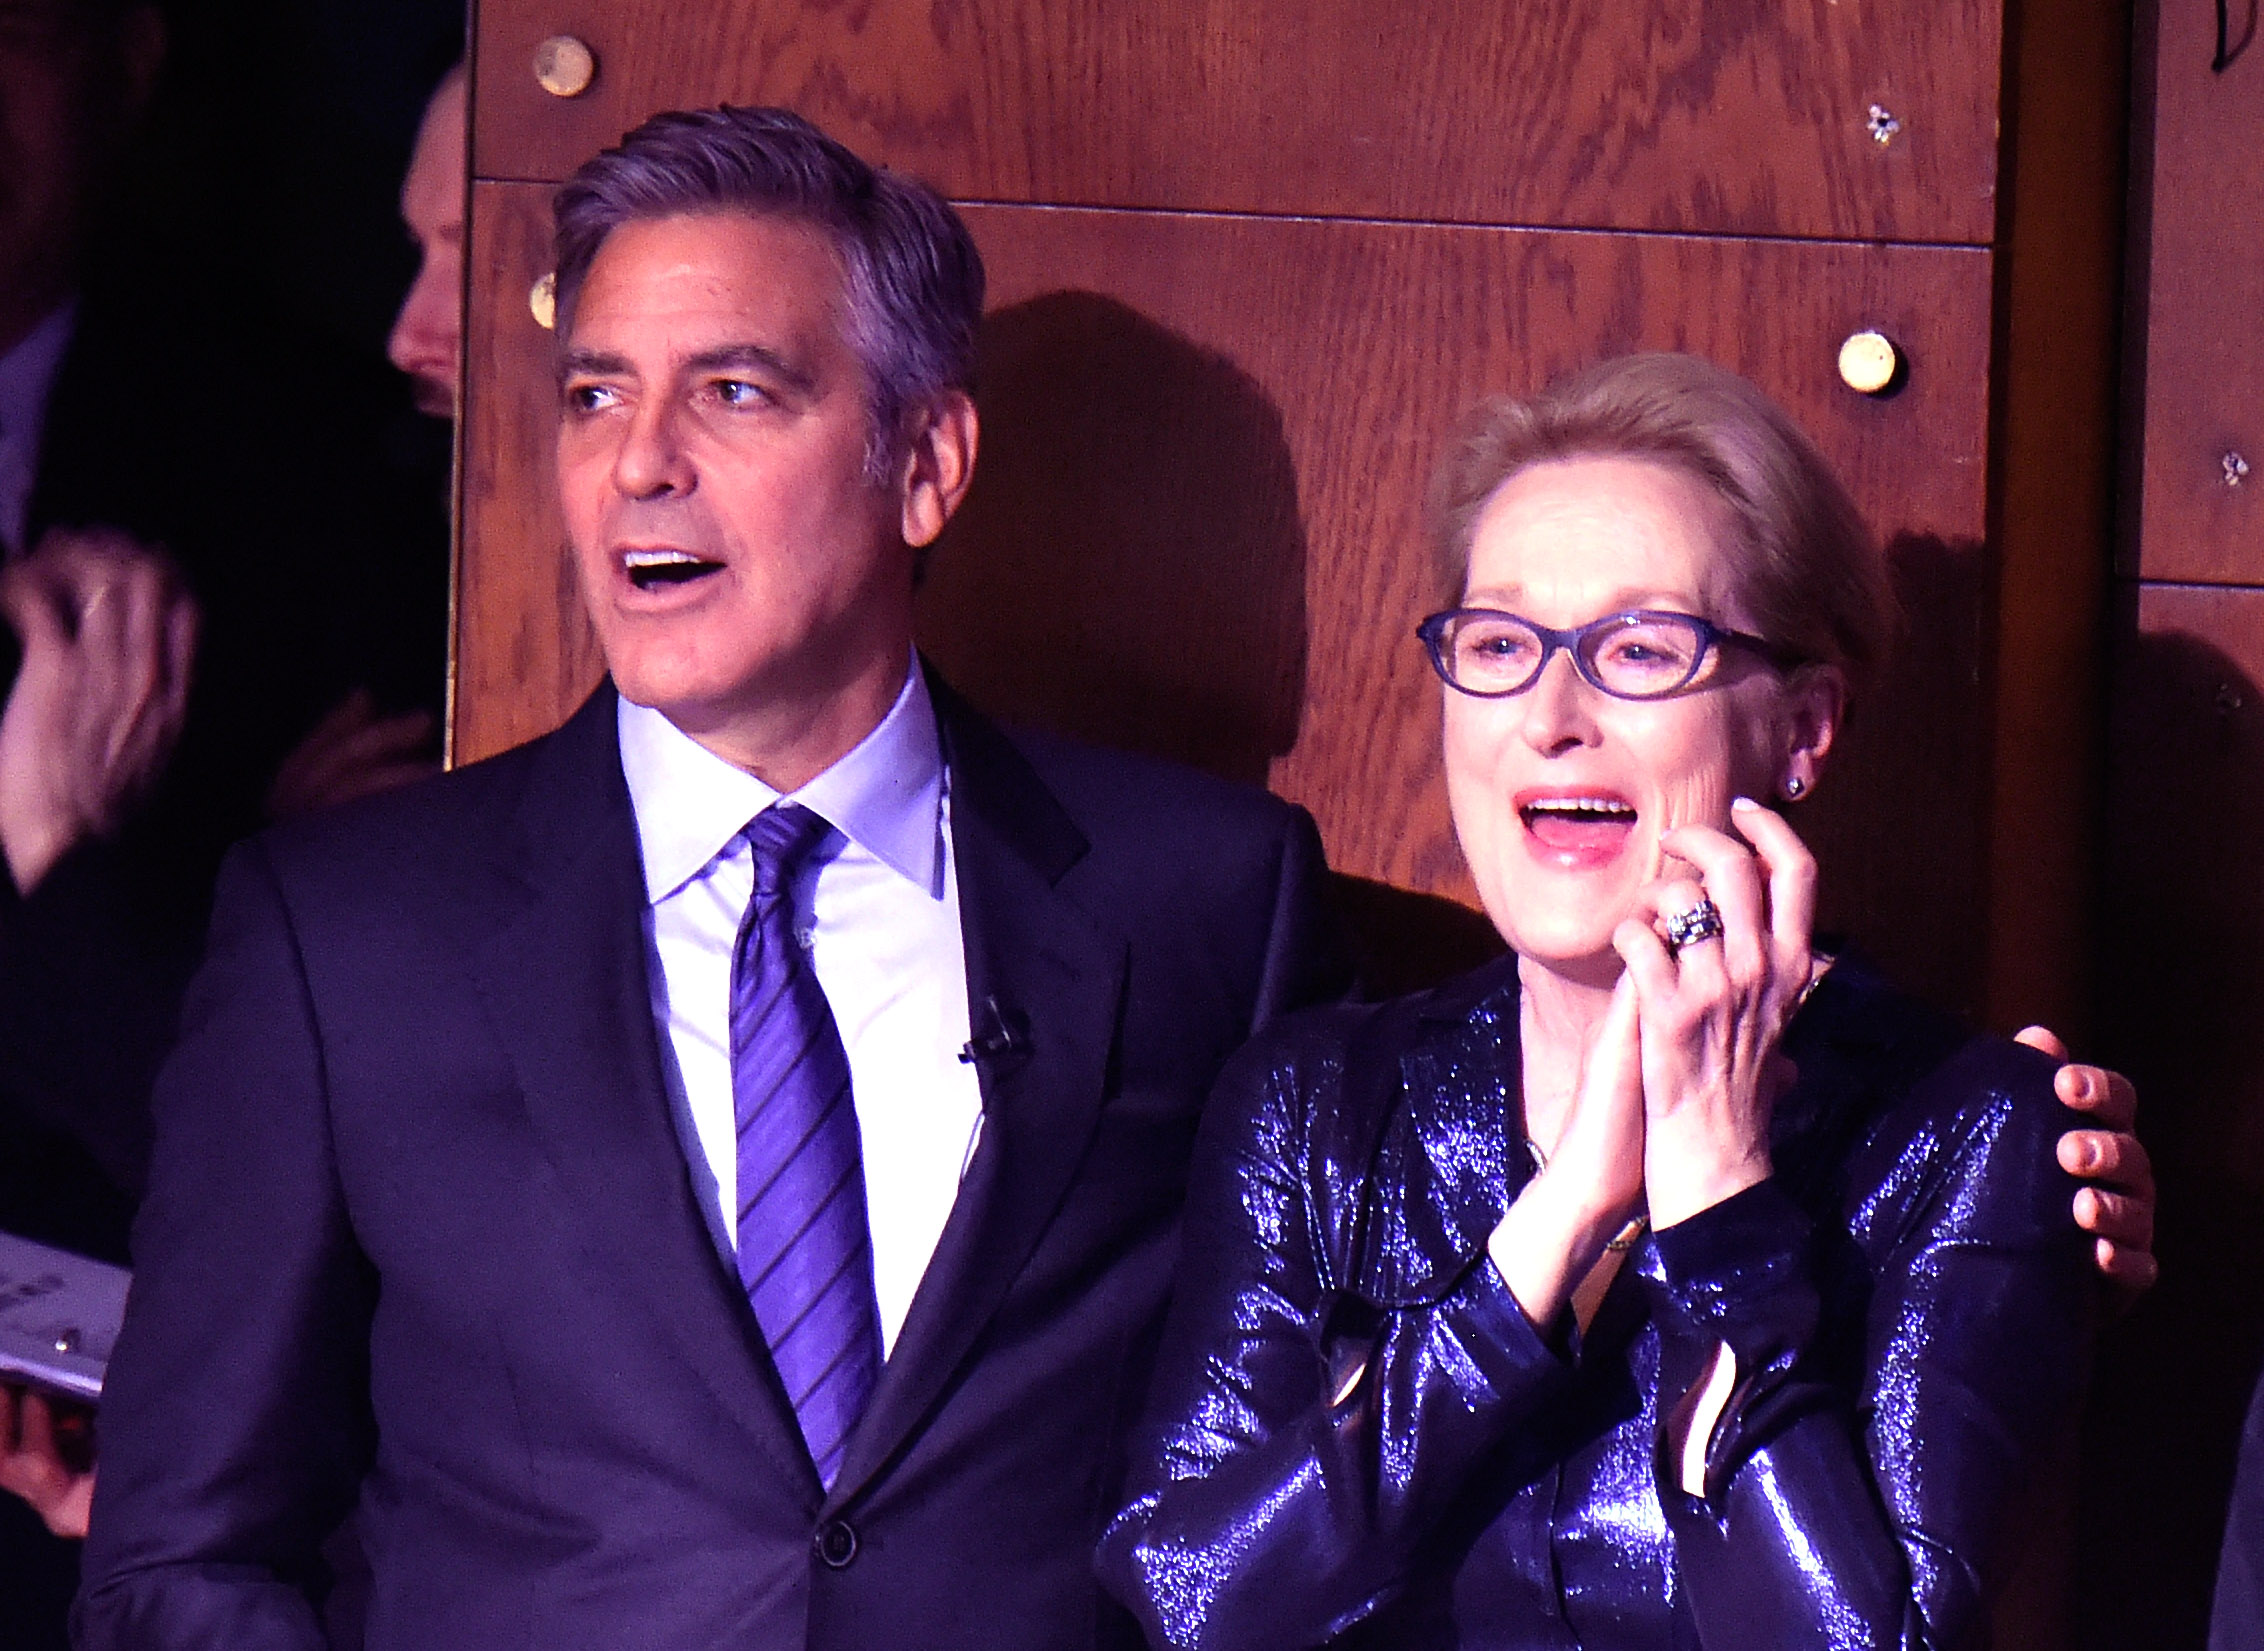 George Clooney and Meryl Streep on March 2, 2015, in New York City | Source: Getty Images